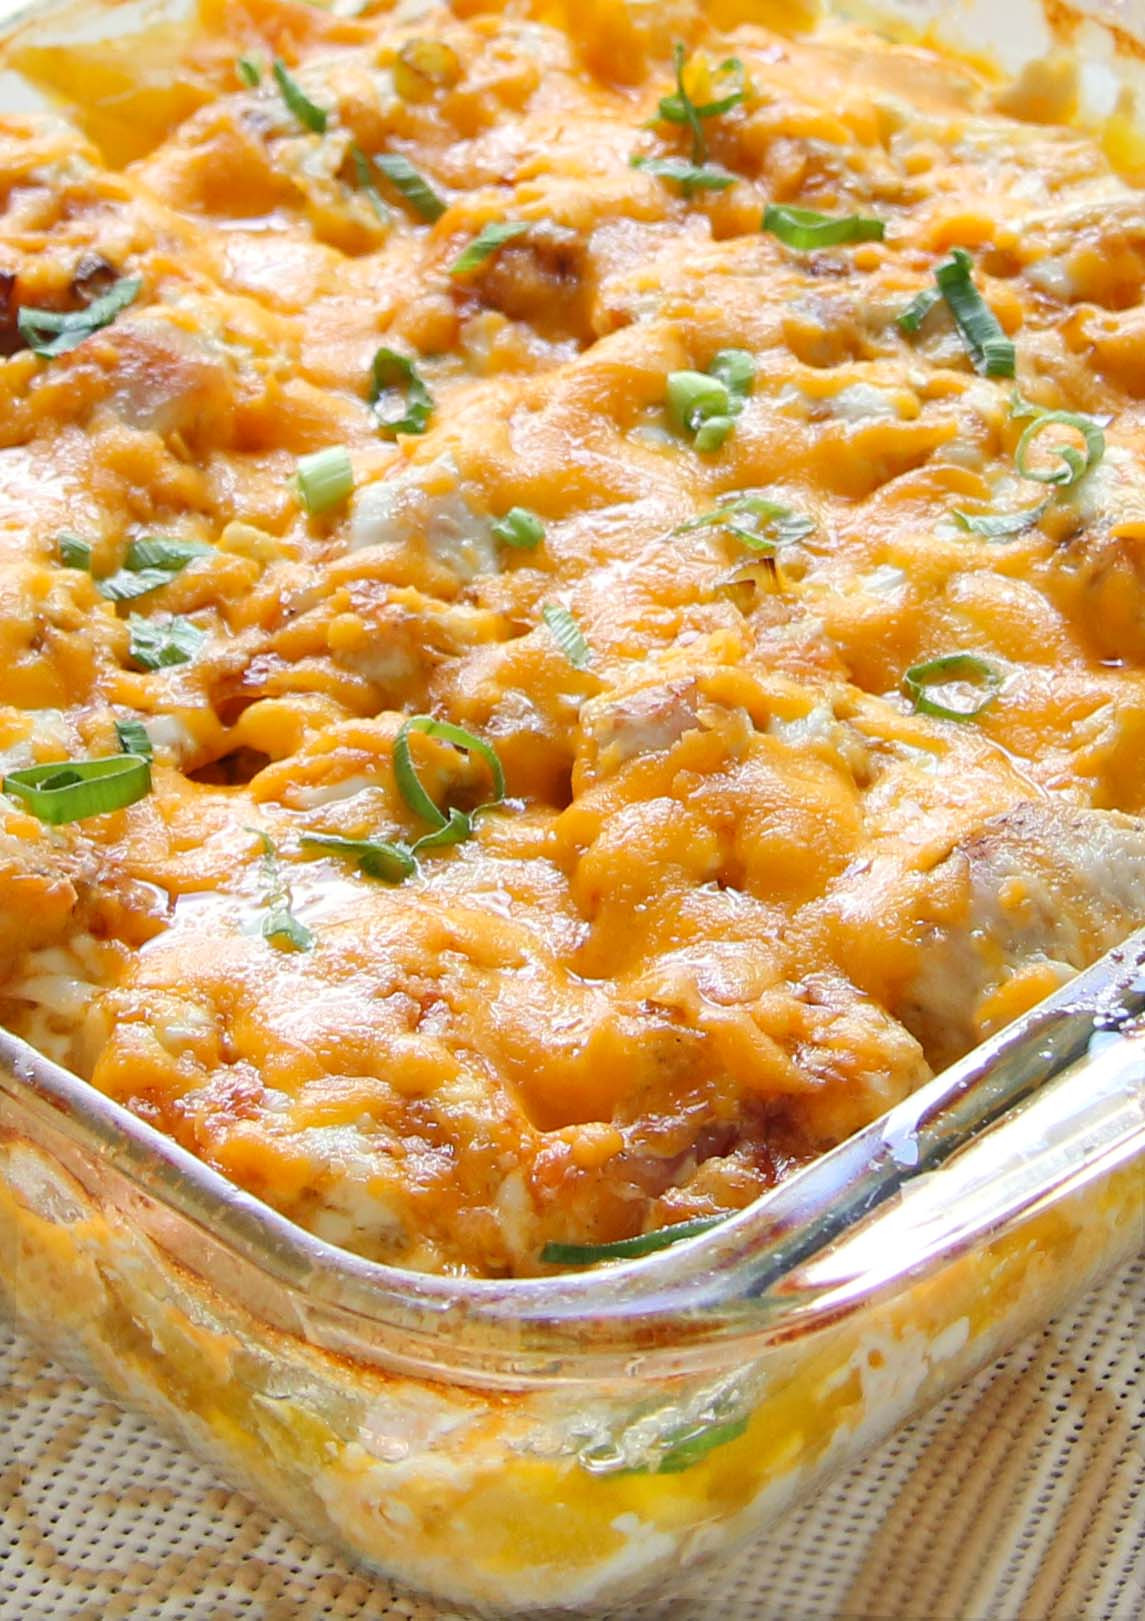 Easy Vegetable Casserole Recipes
 Loaded Baked Chicken Potato Casserole Cakescottage